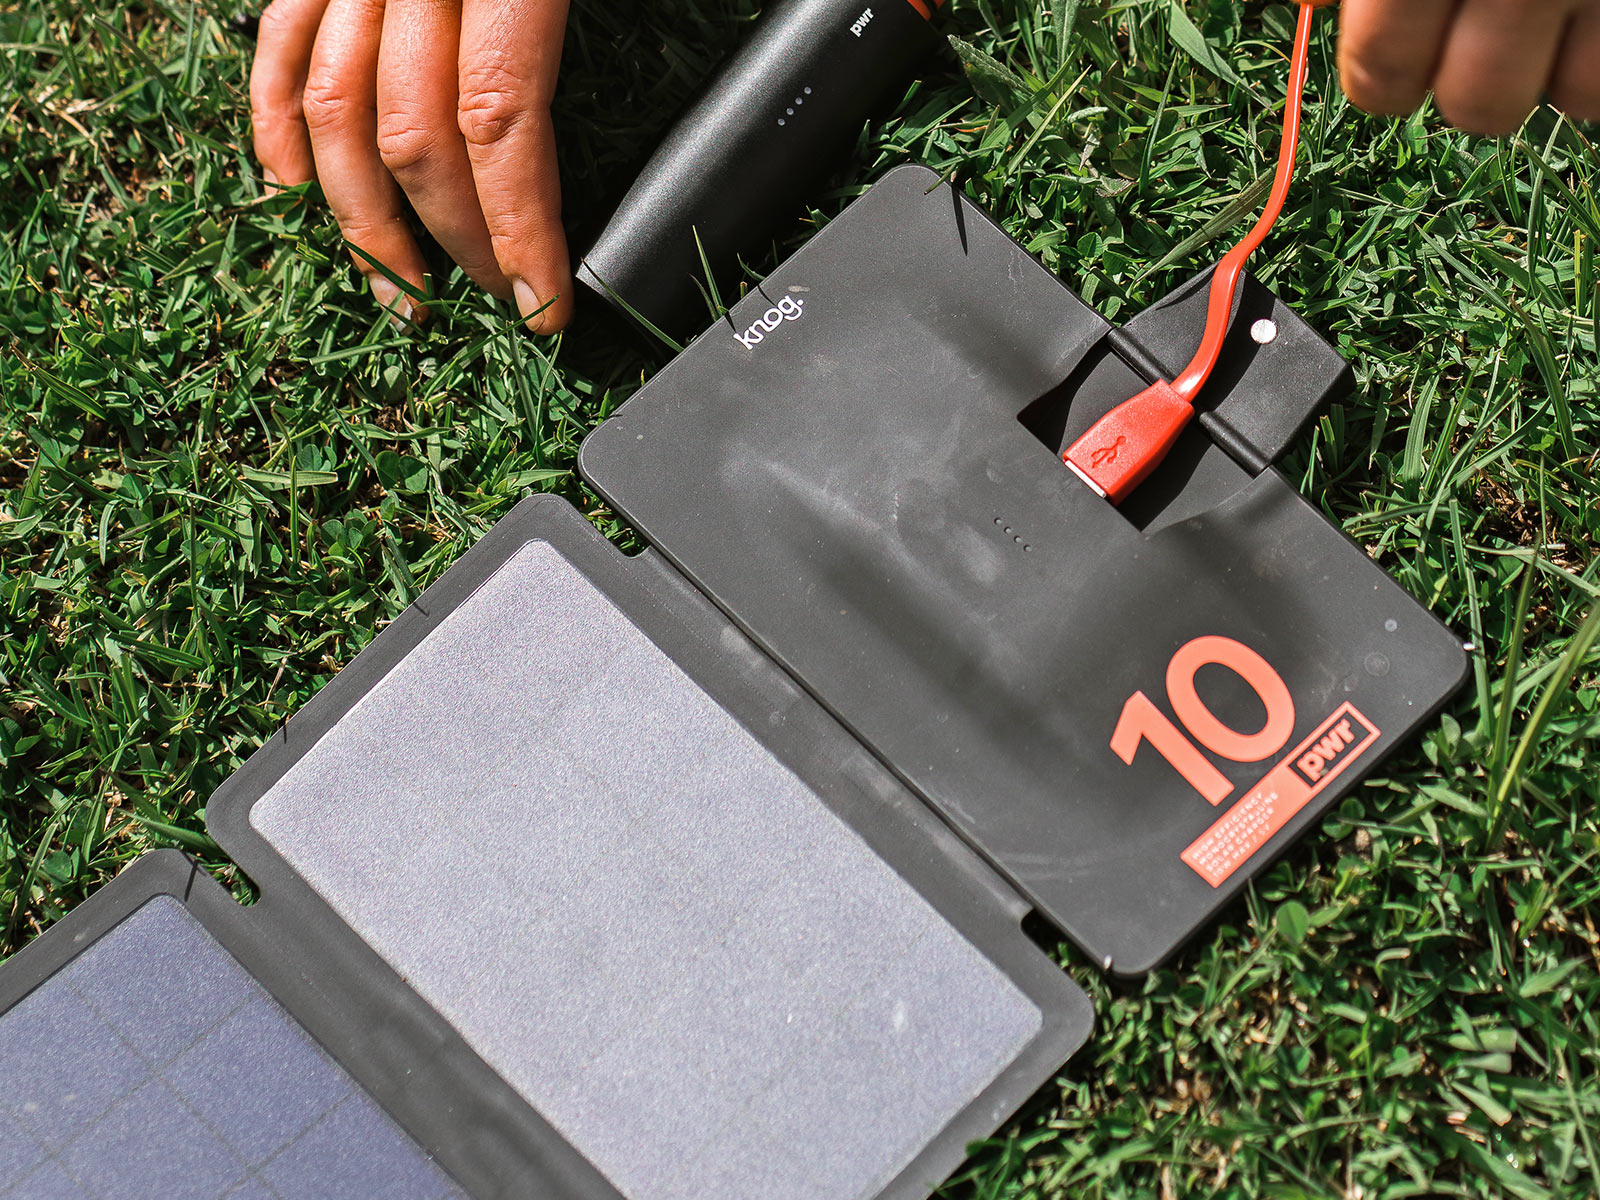 Knog PWR Solar 10W, folding compact photovoltaic panel bikepacking solar charger, detail